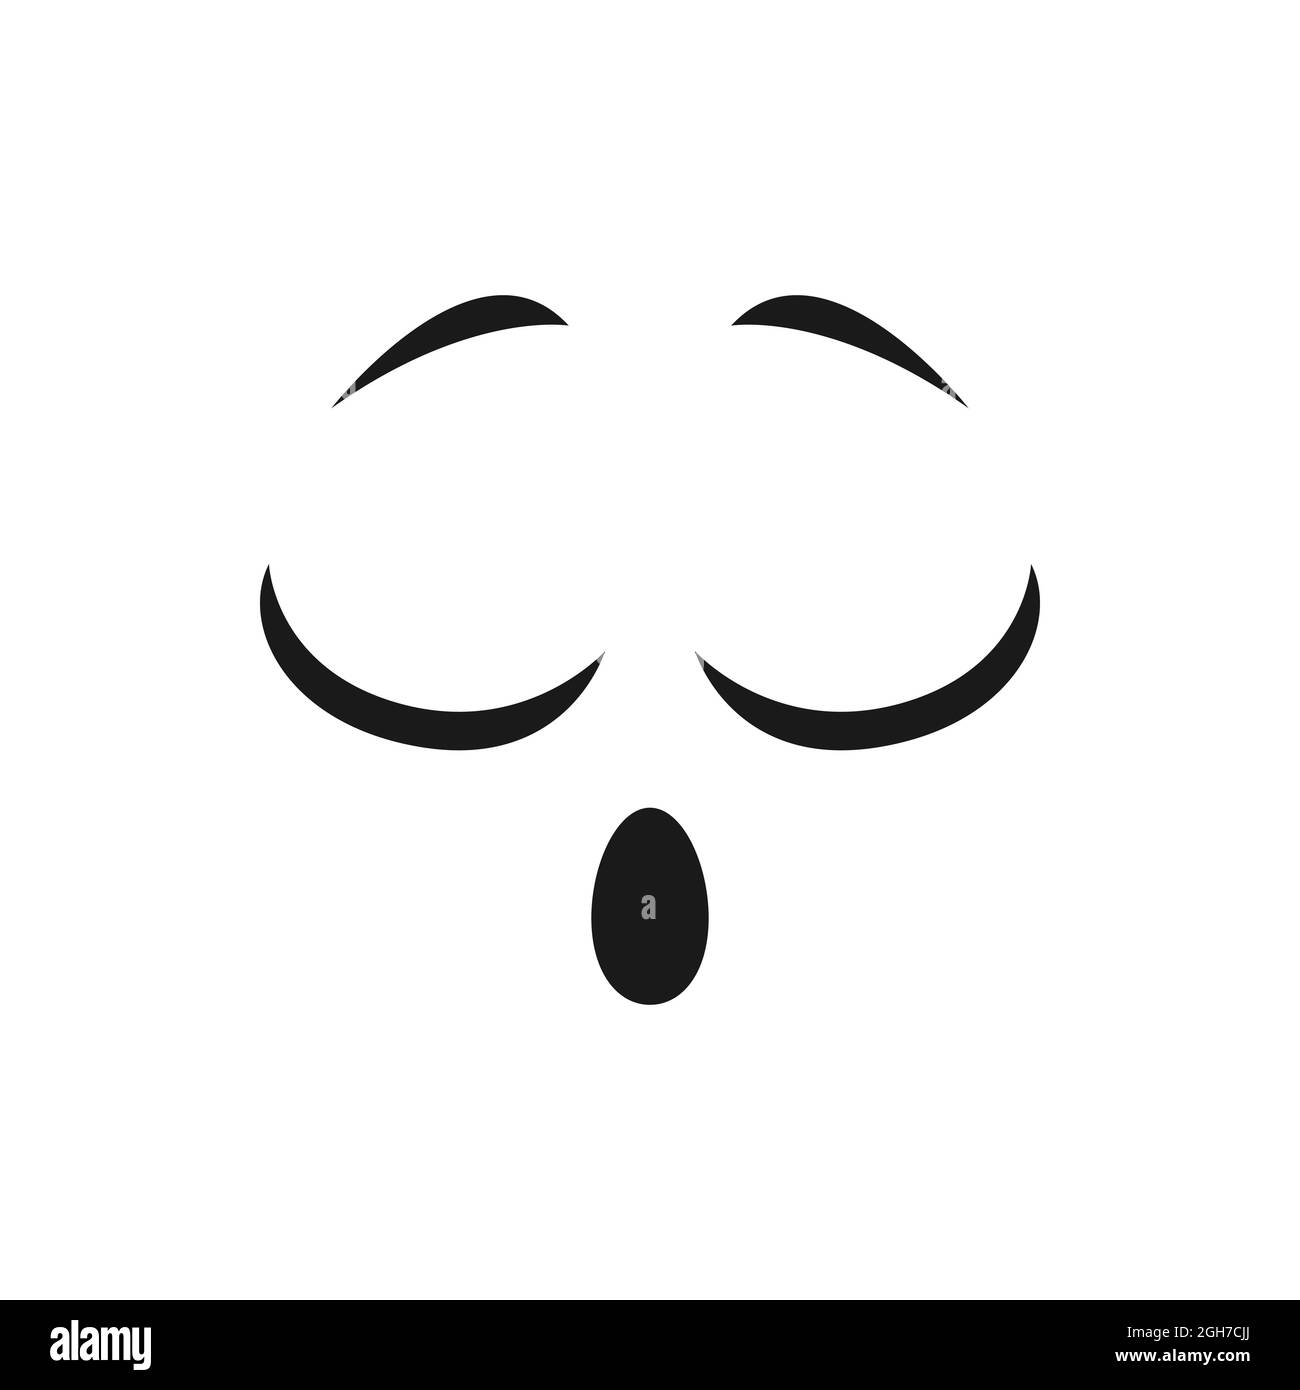 Roblox Face Smiley Avatar, Face, text, people png